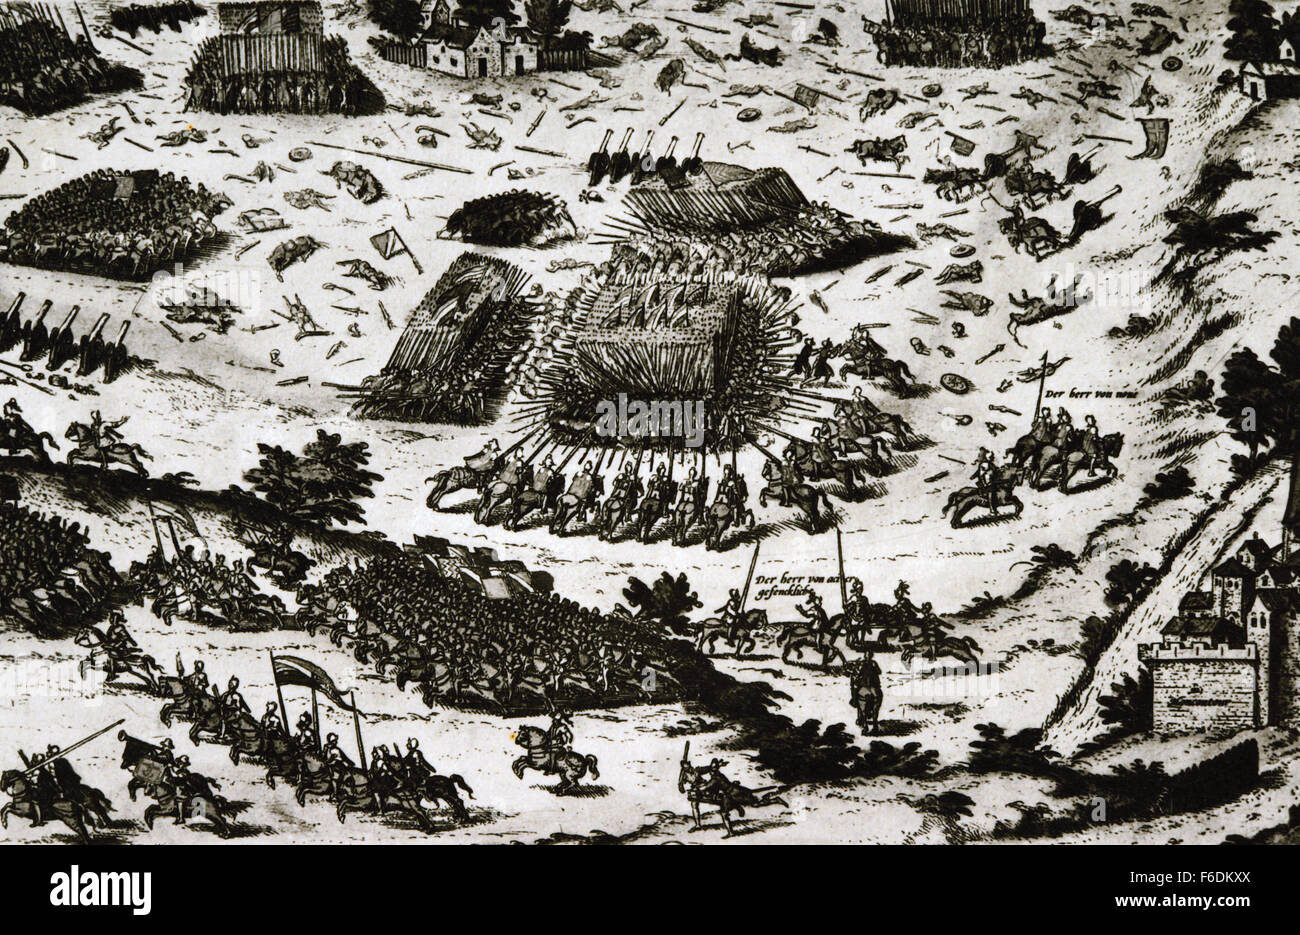 Battle of Moncontour, 3 October 1569, between the Catholic forces of king Charles IX of France and the Huguenots during the Third War (1568-1570) of the French Wars of Religion. Engraving. Stock Photo